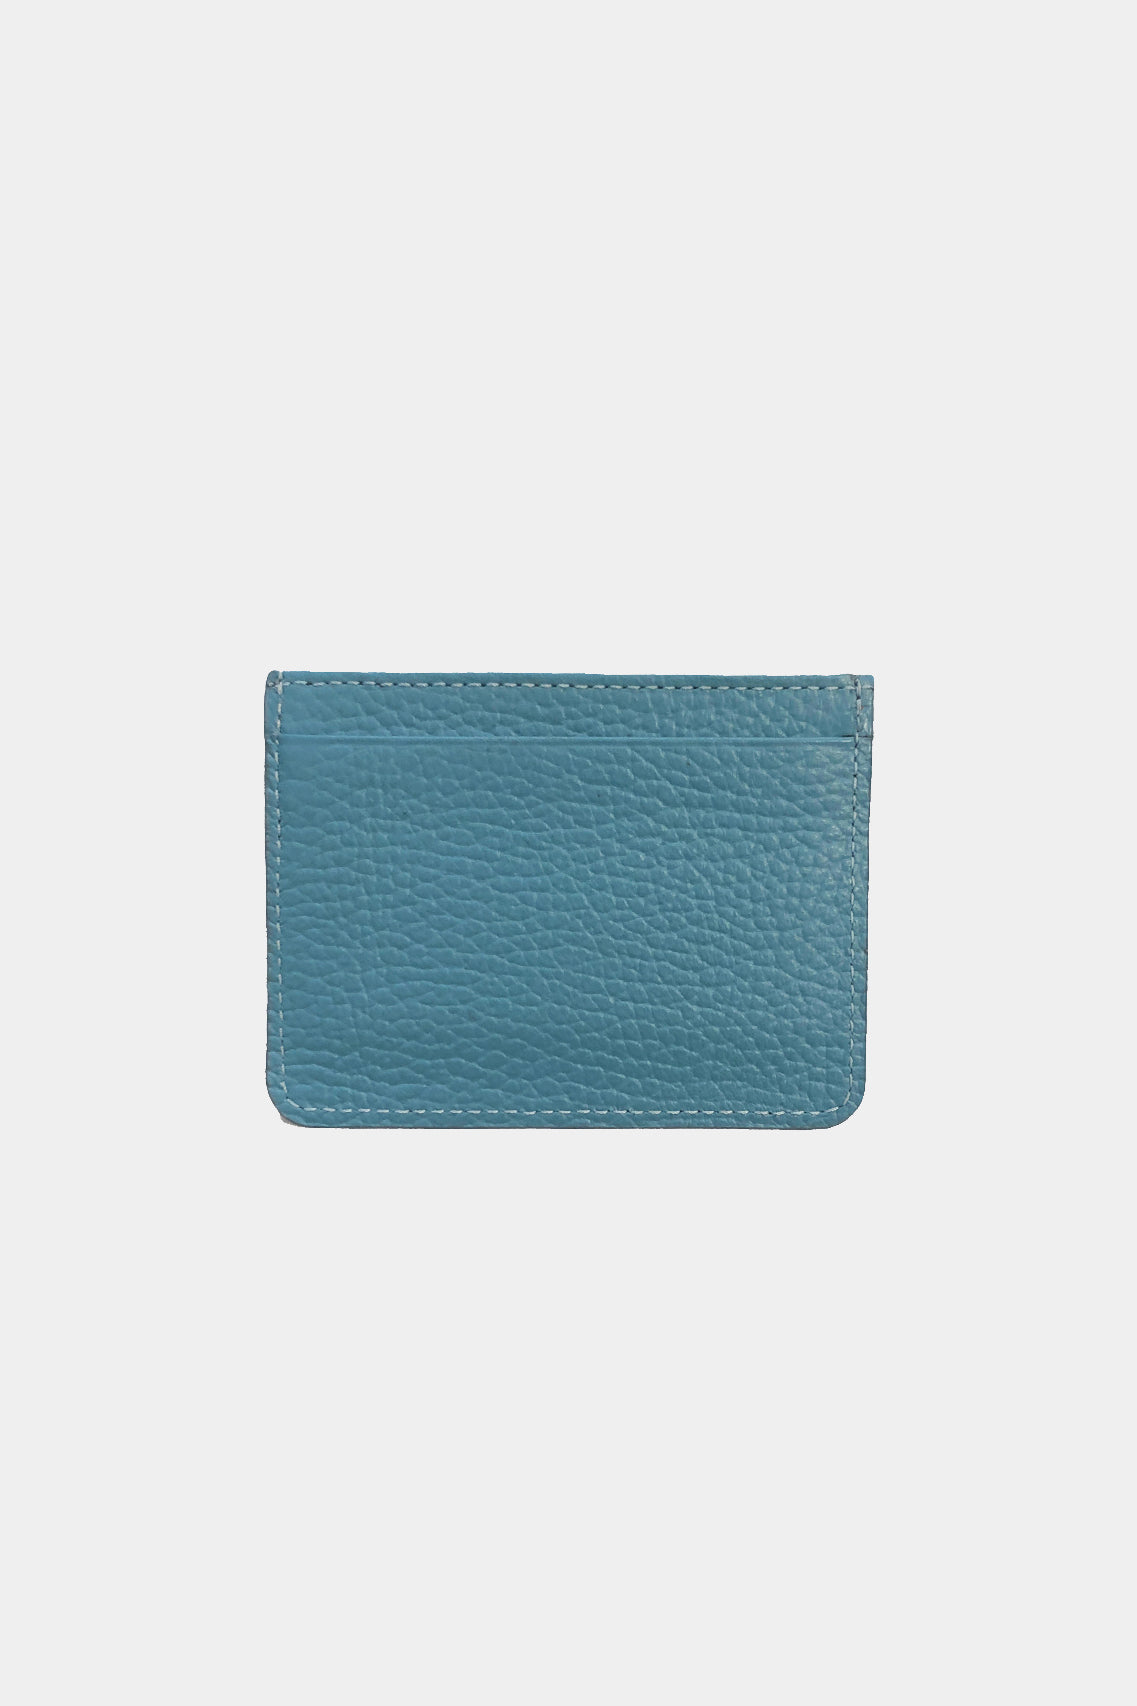 CLEAR BLUE LEATHER CARDHOLDER